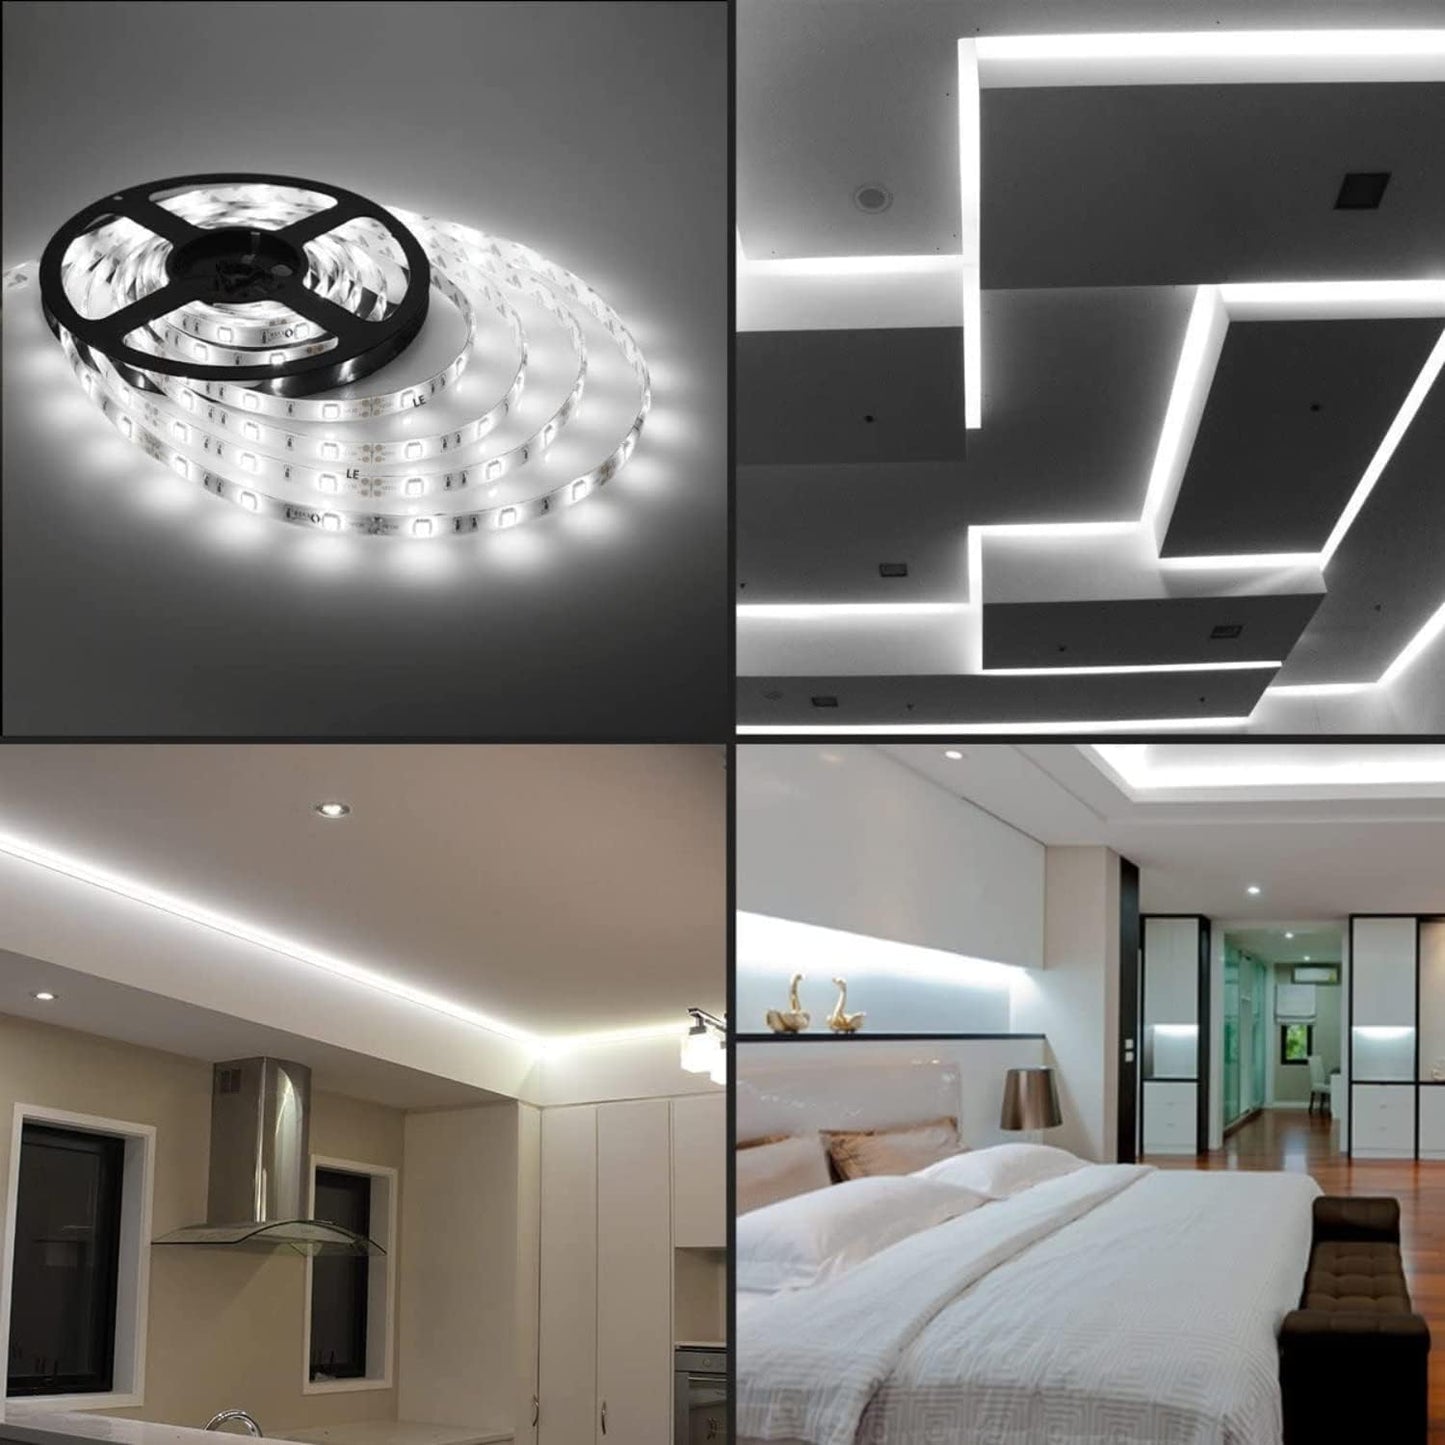 40 Meter LED Strip Light with Adapter | Waterproof Ceiling Light for Home Decoration (Cool White)